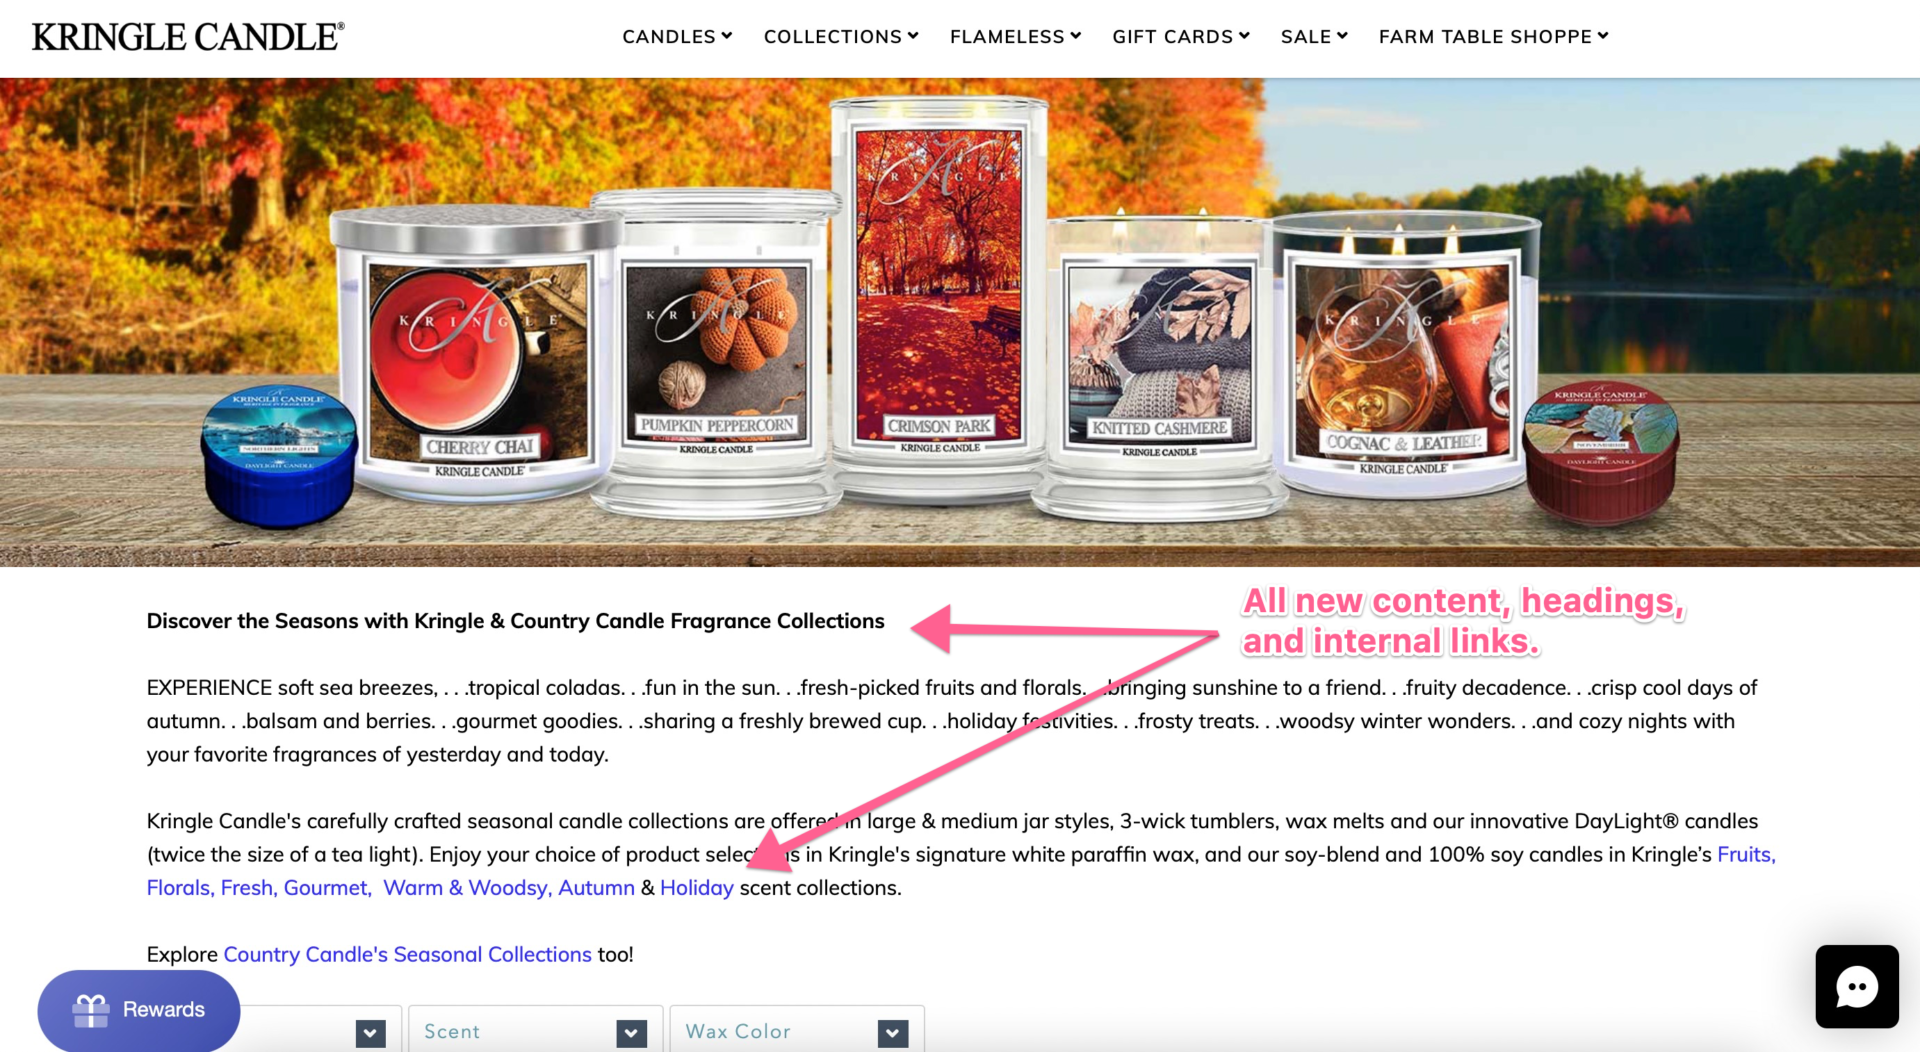 Screenshot of the changes made to Kringle Candle's collection pages.